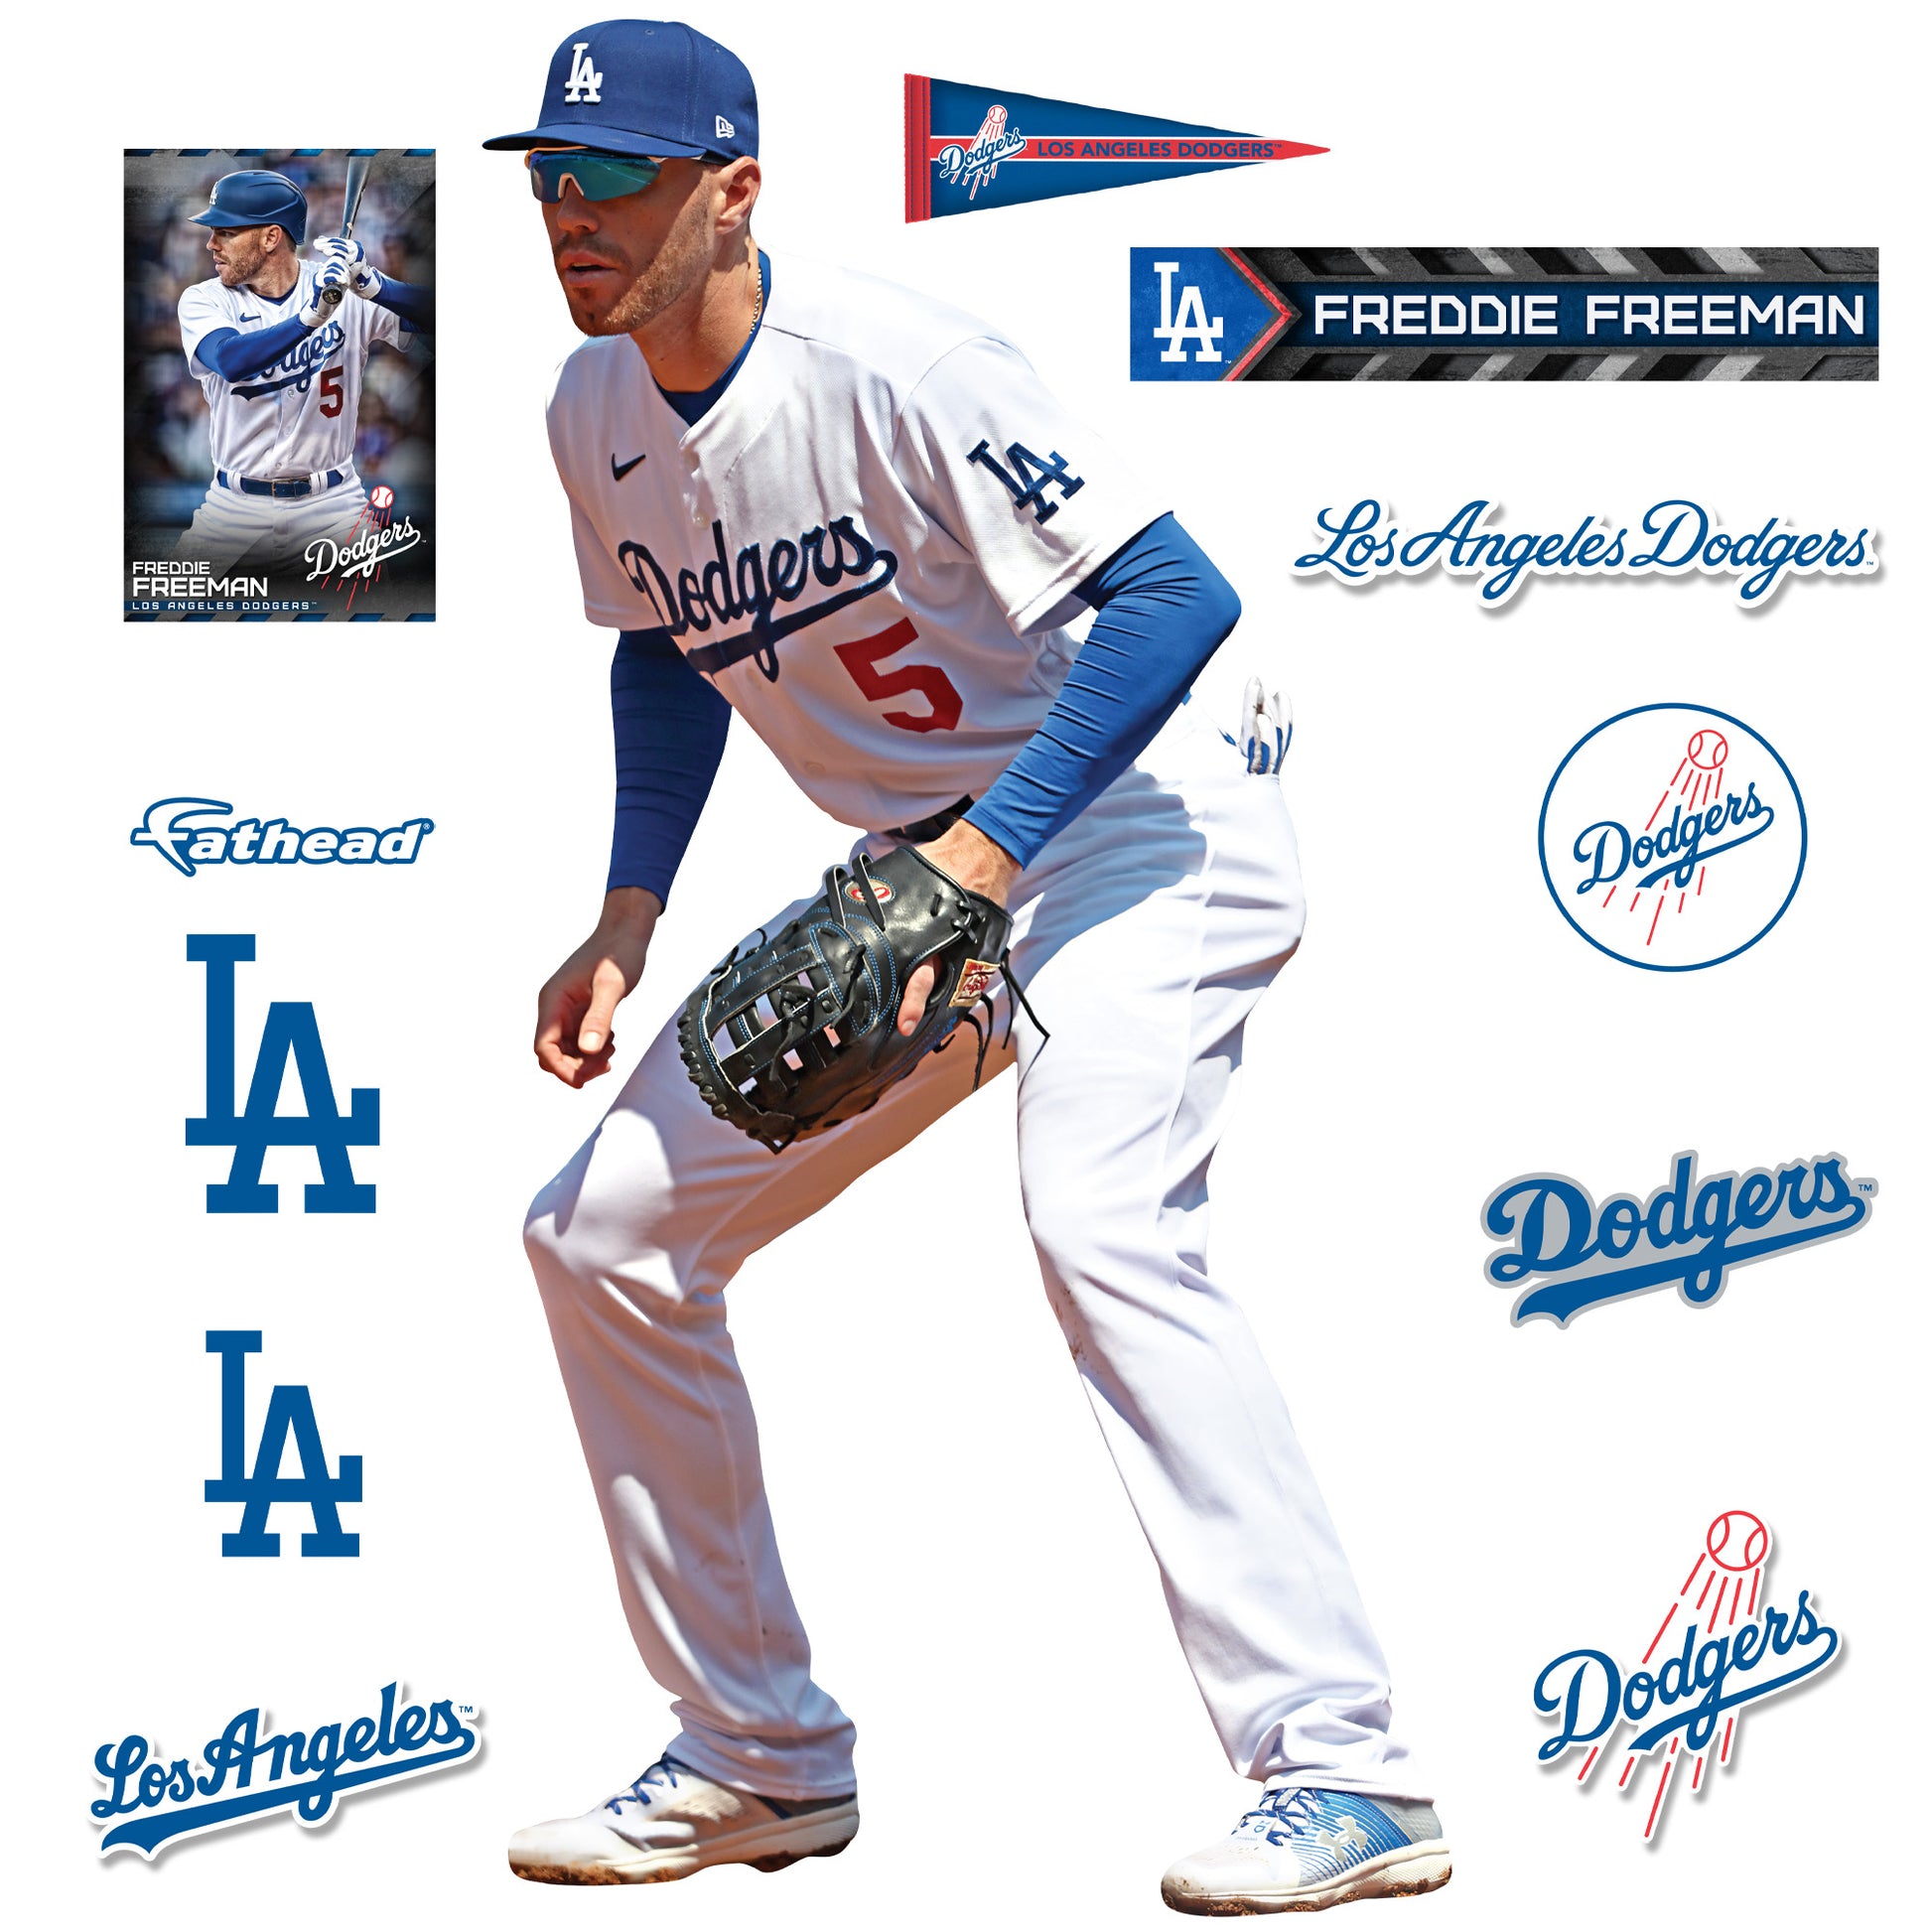 Where to get your official Freddie Freeman Los Angeles Dodgers